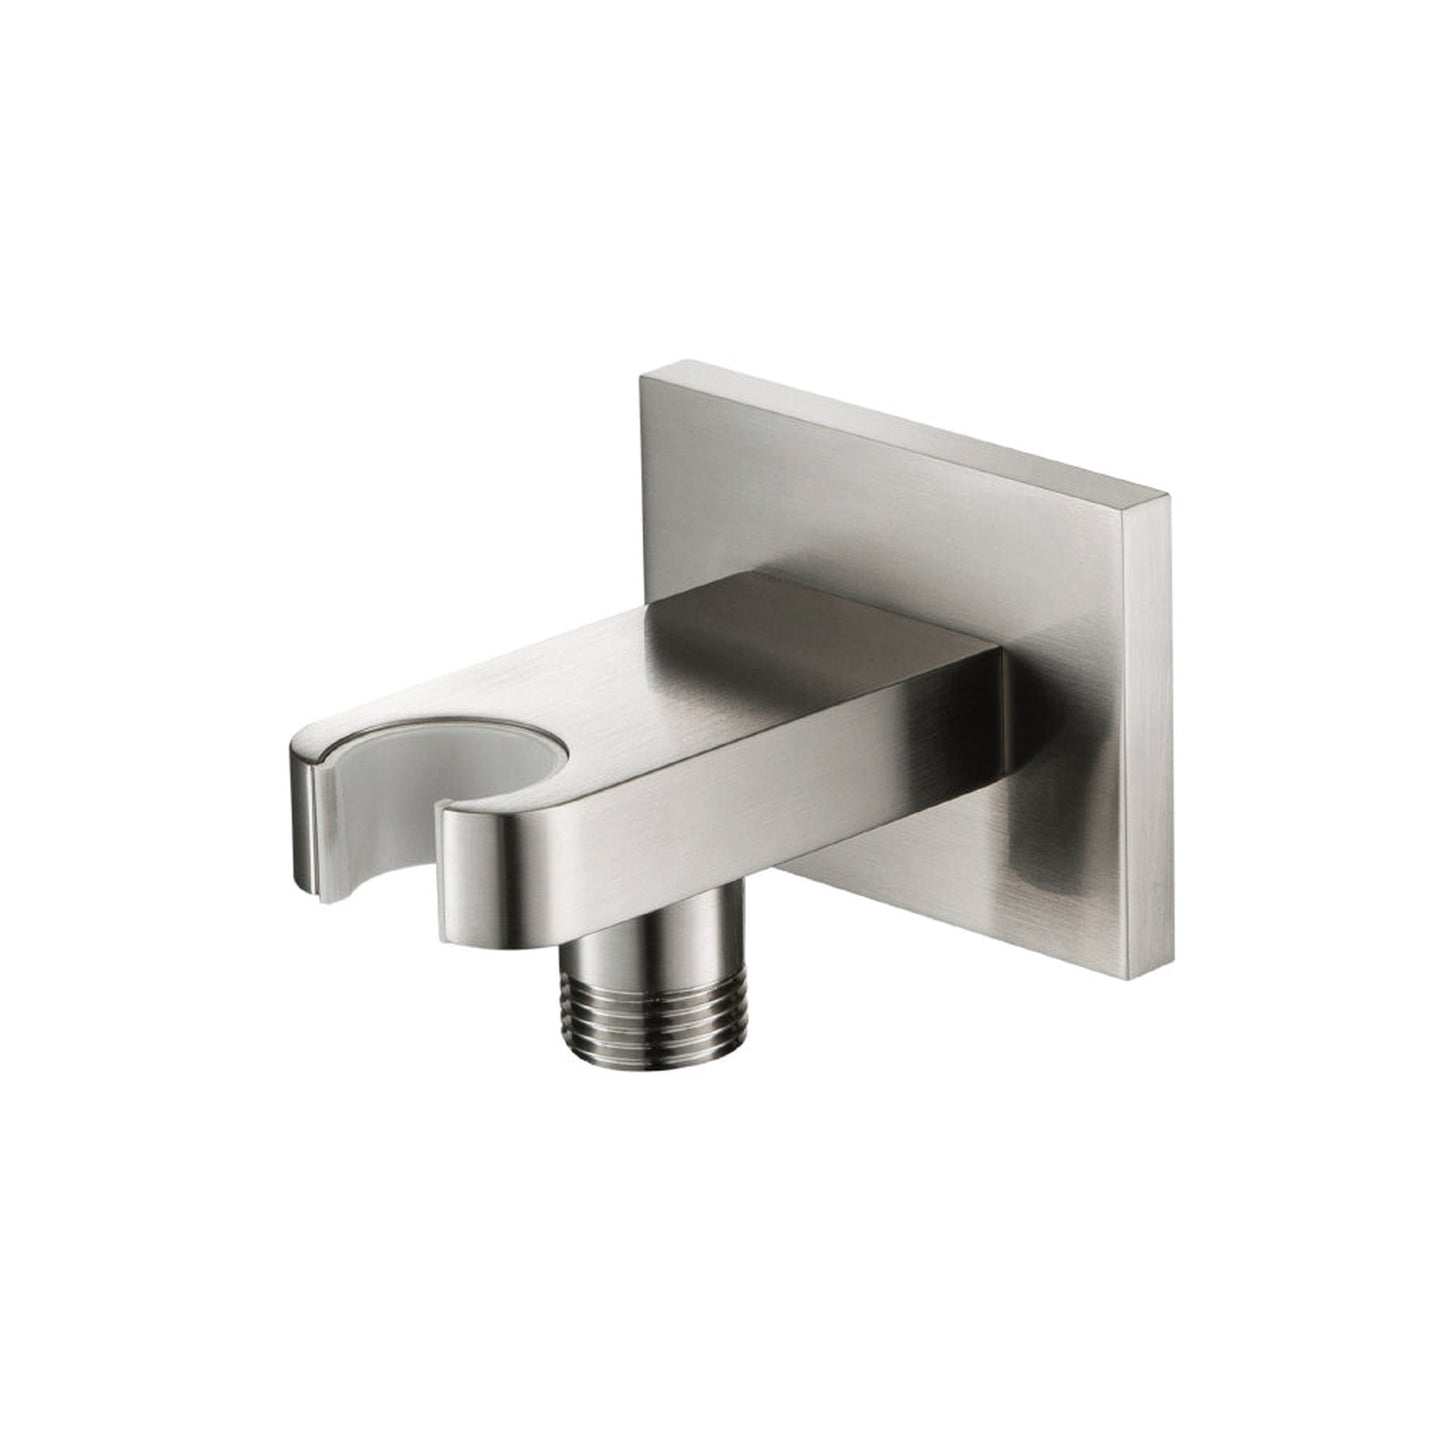 Isenberg Universal Fixtures Wall Elbow With Combo Holder in Brushed Nickel (HS8007BN)